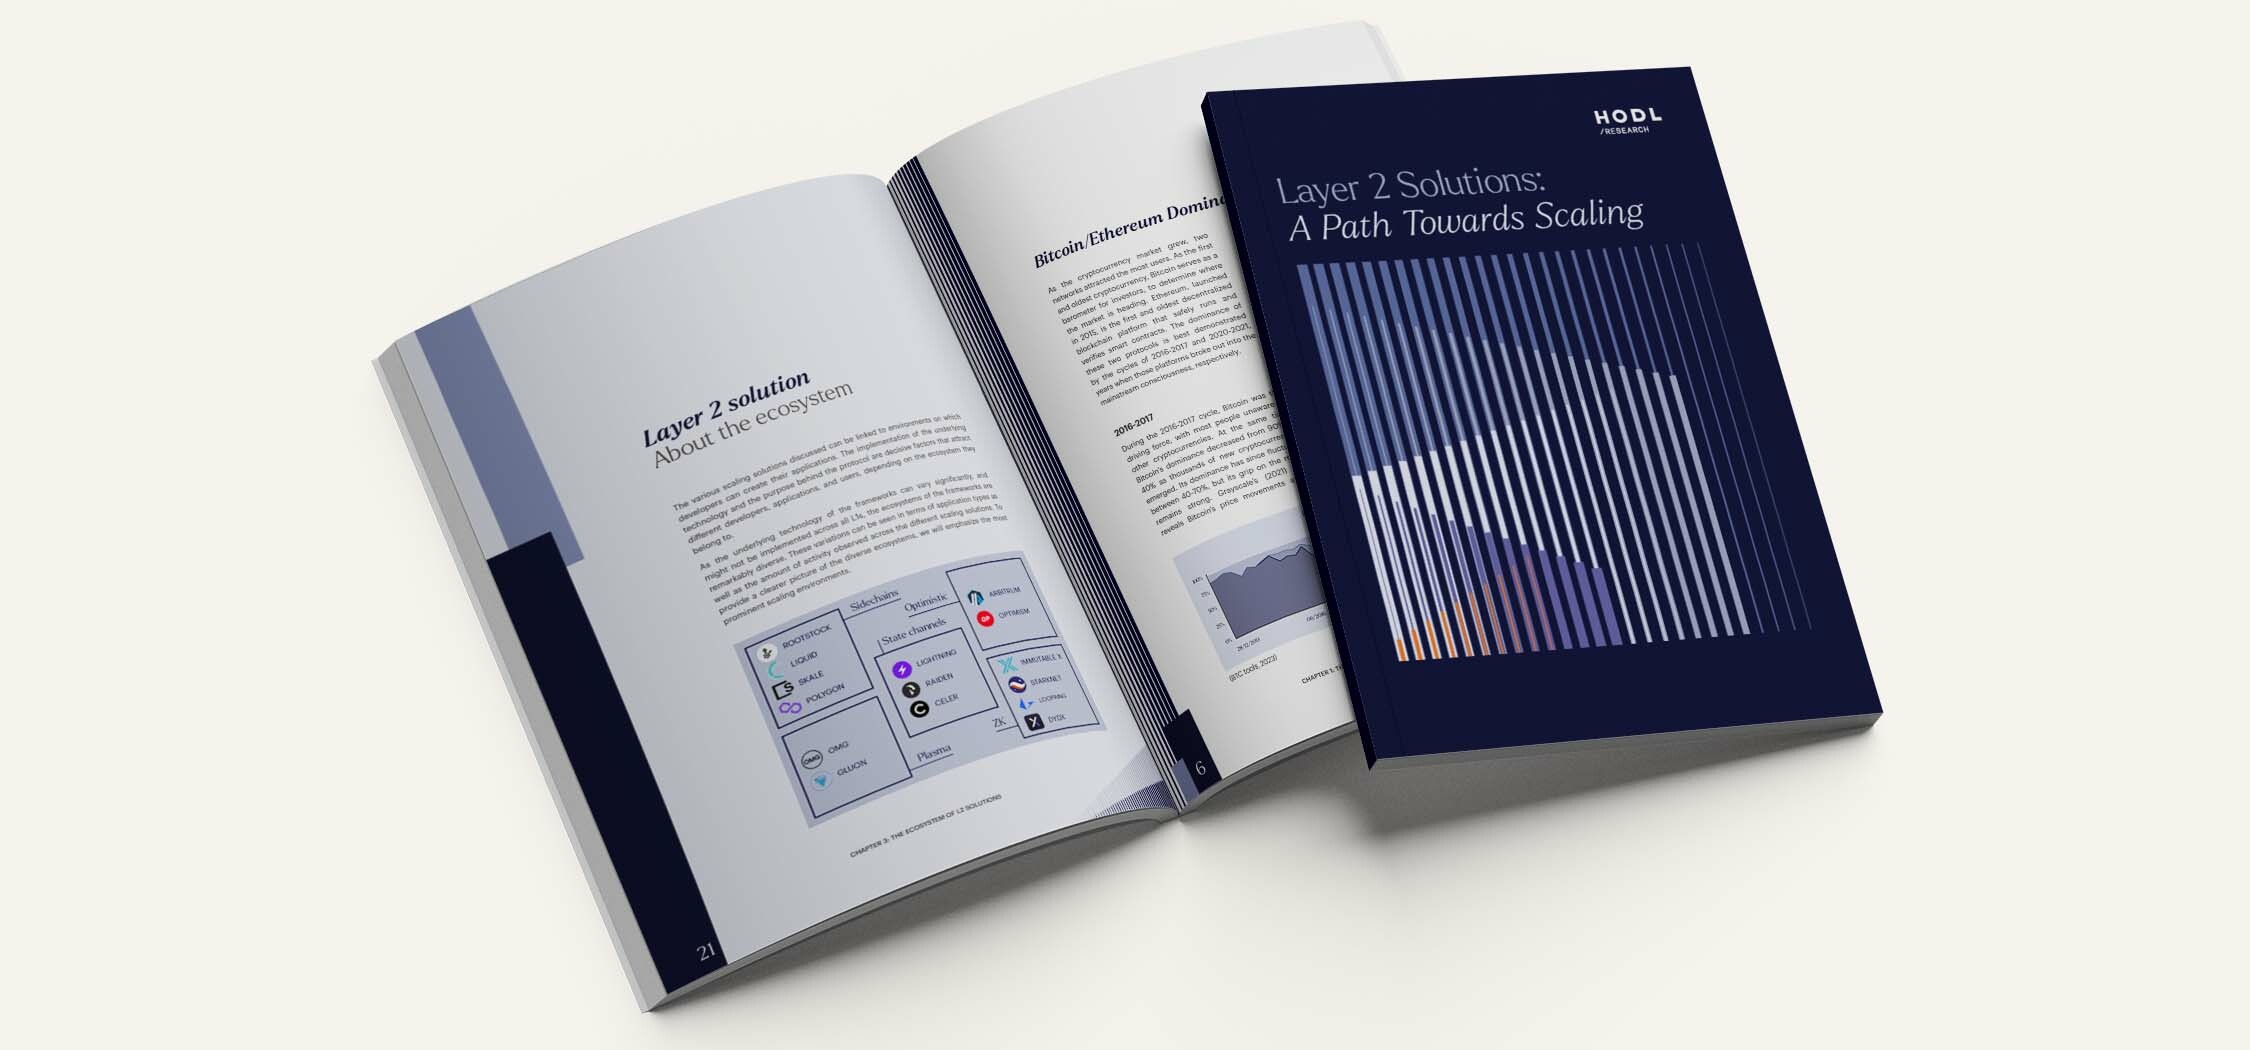 Hodl Research Scaling solutions industry report